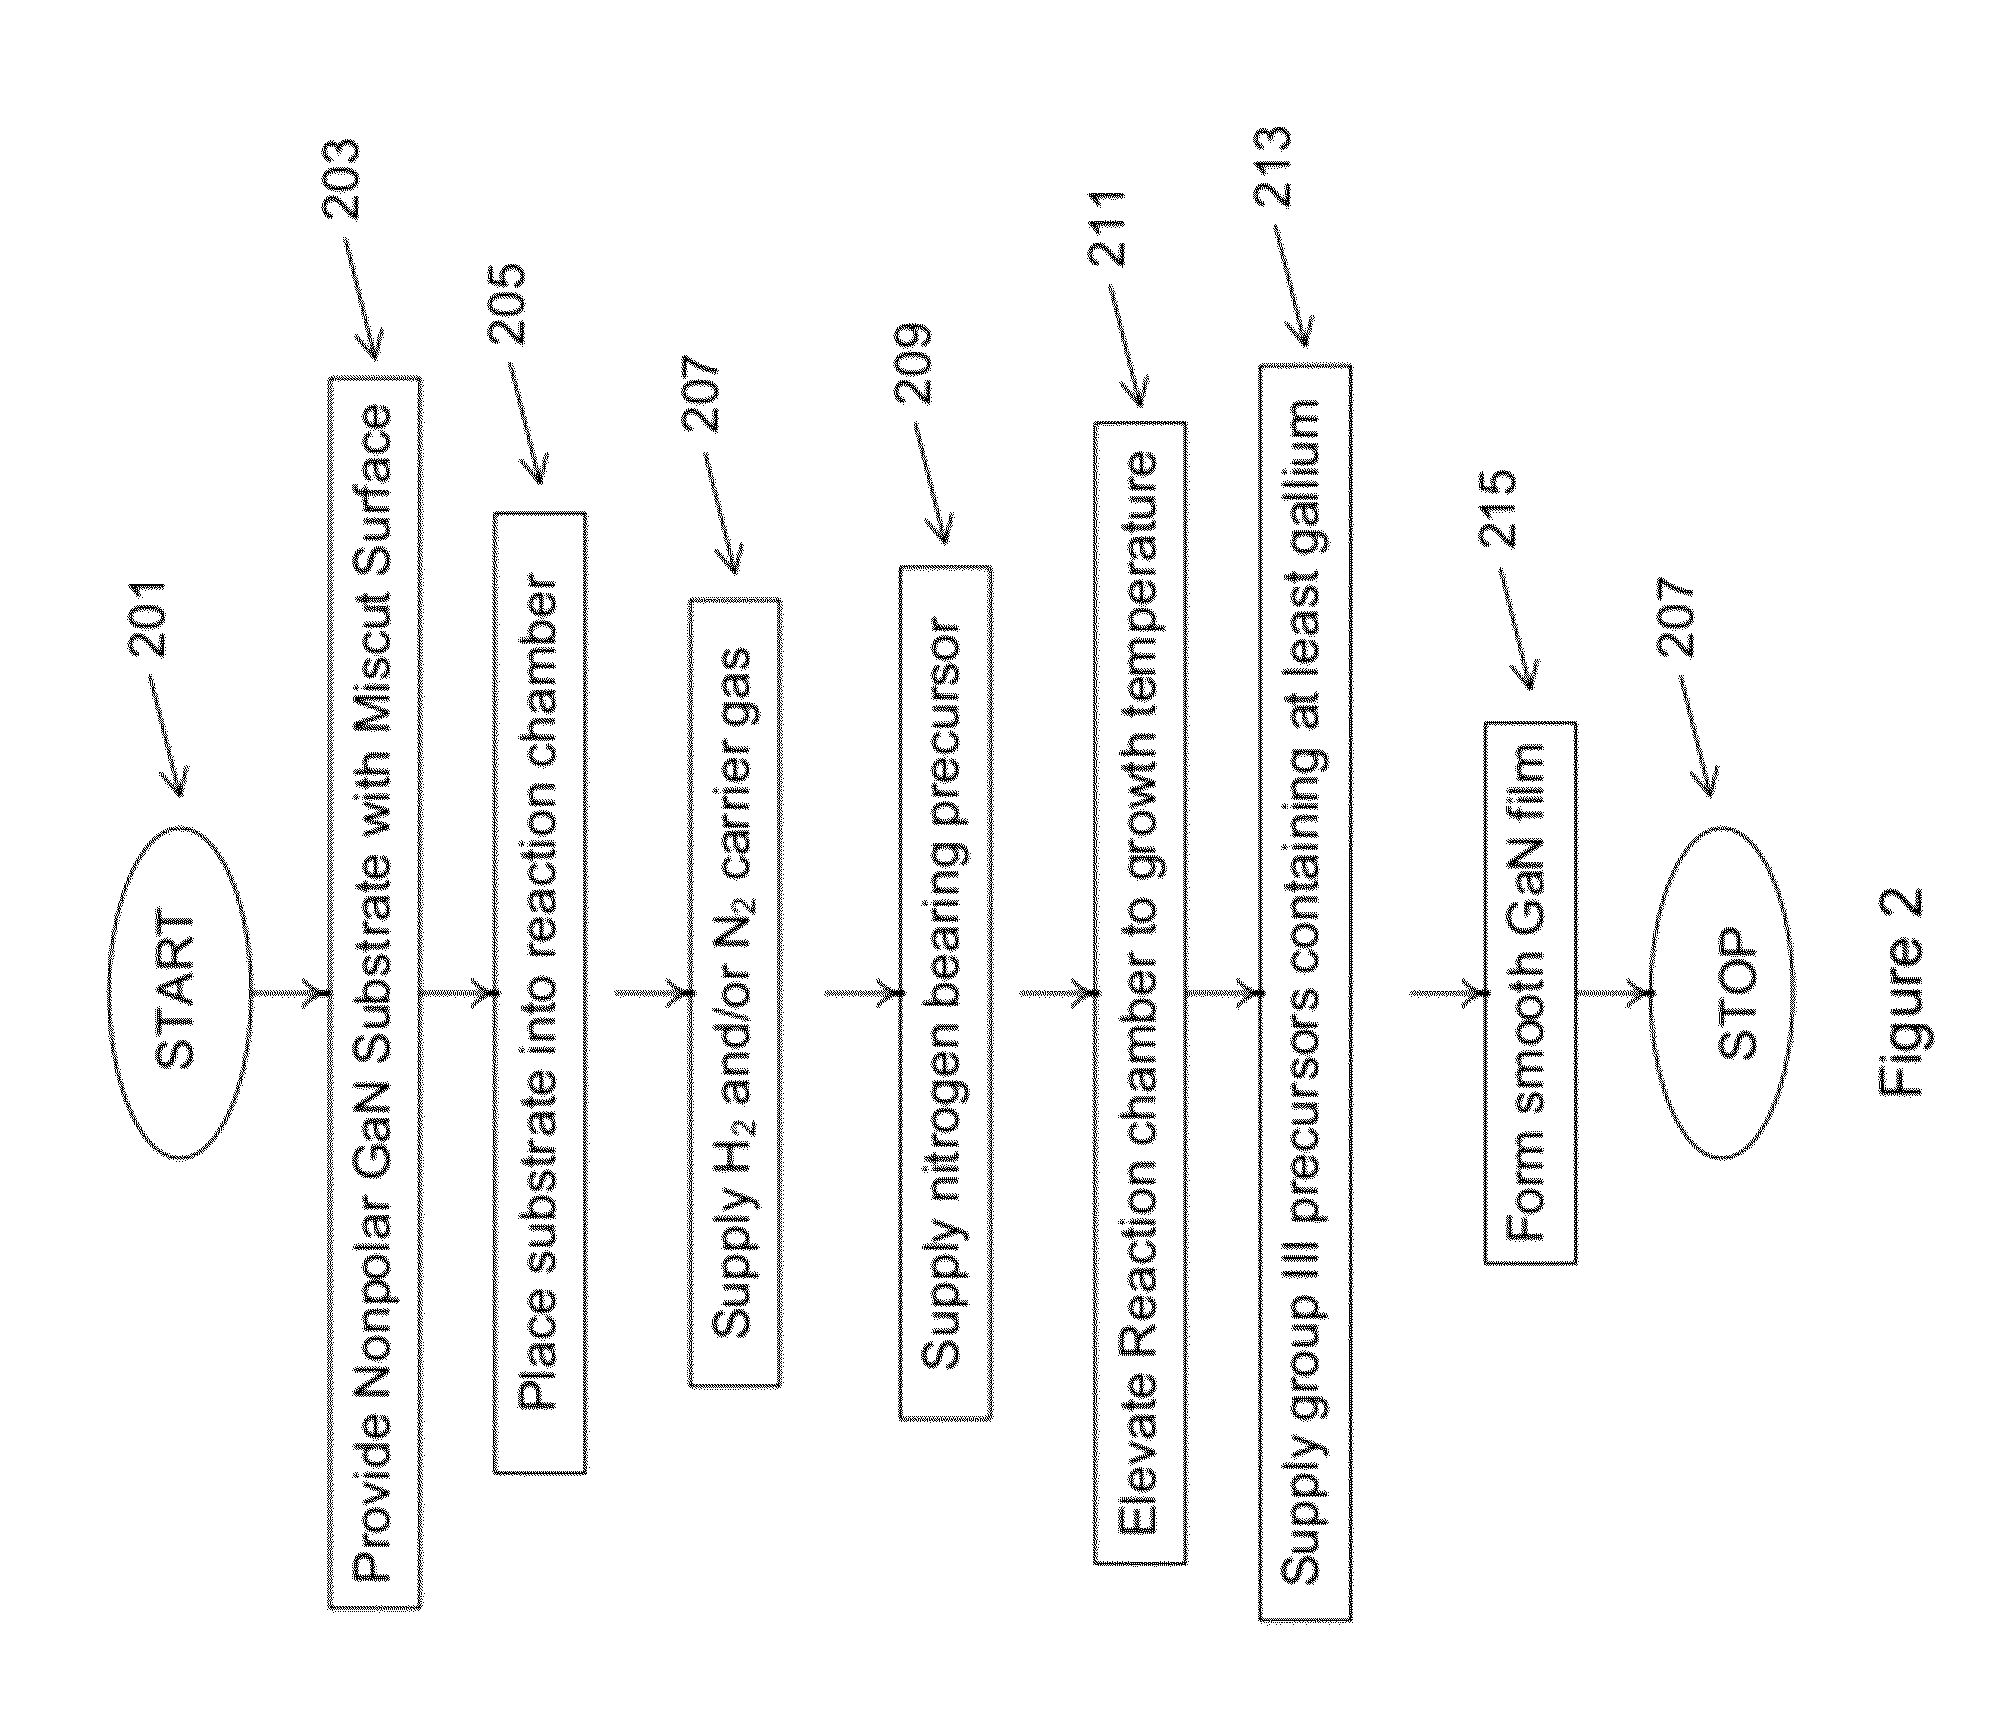 Method and surface morphology of non-polar gallium nitride containing substrates